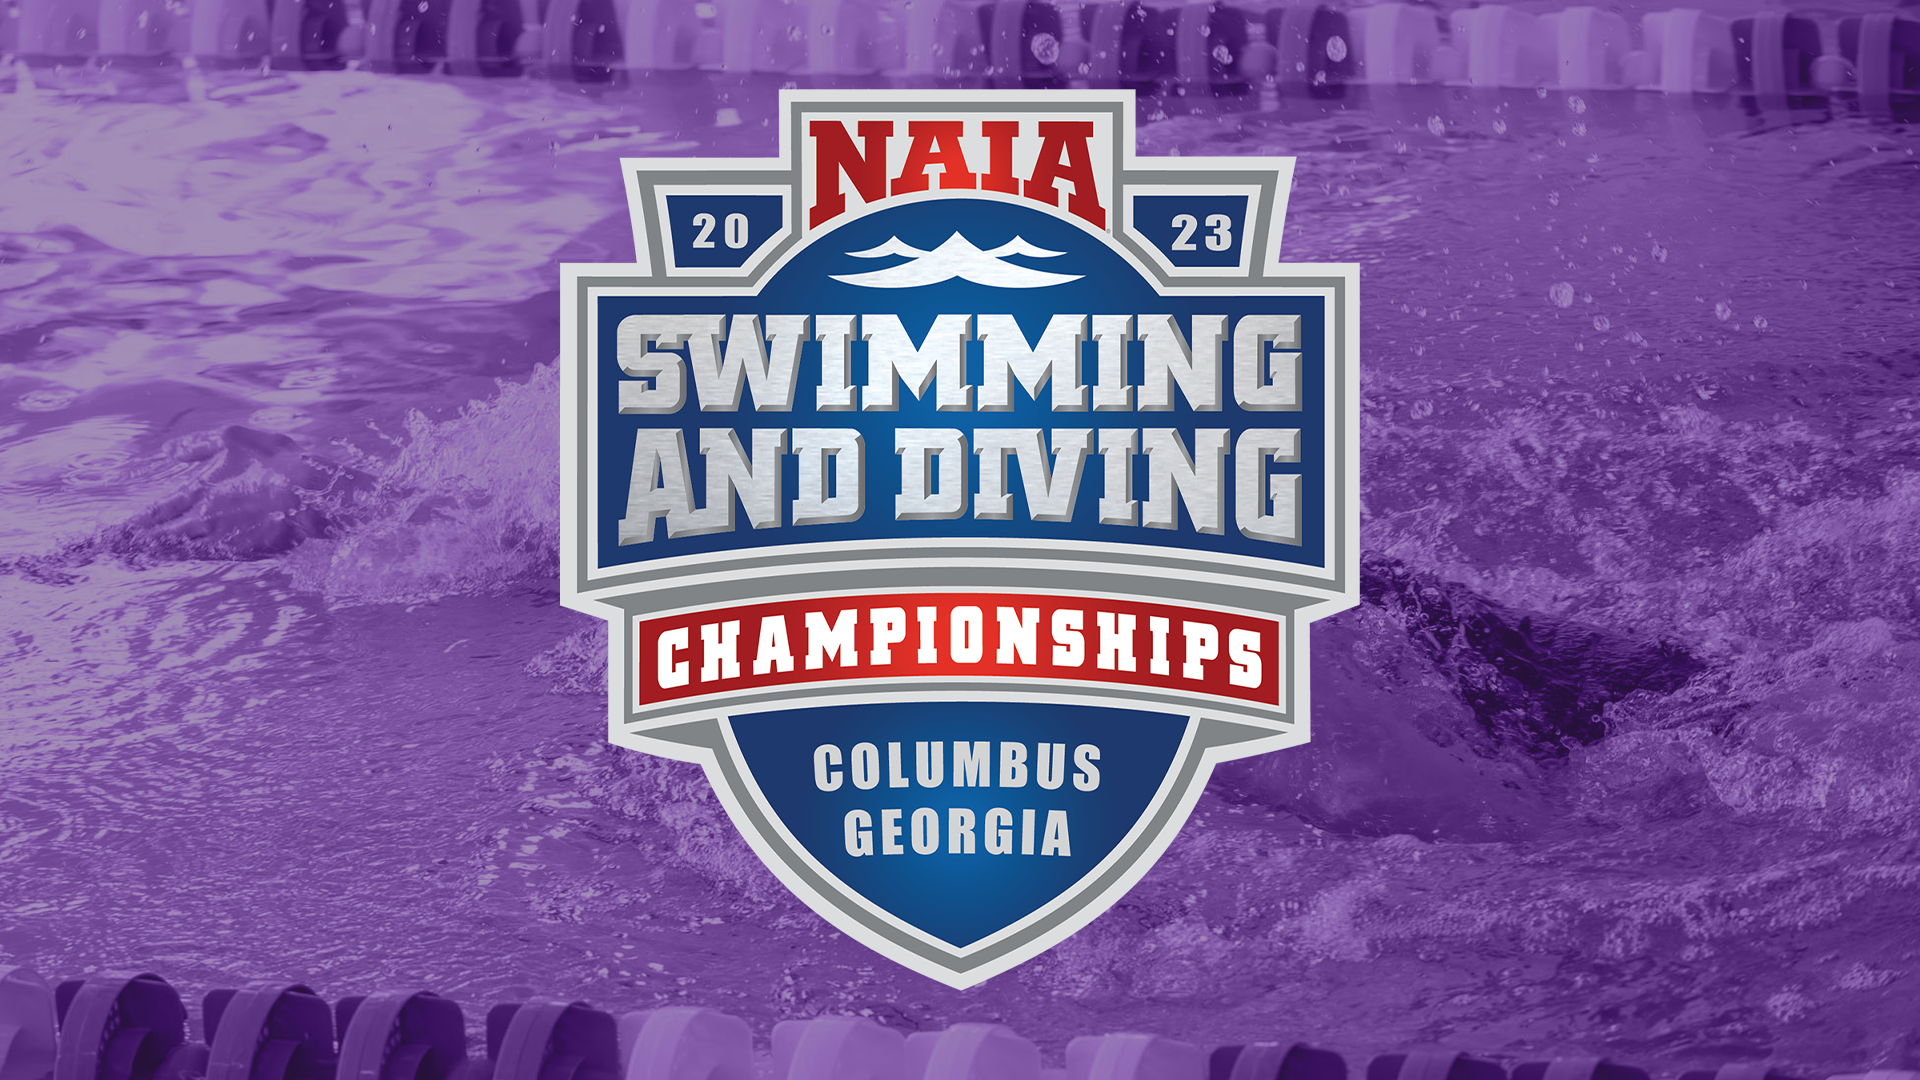 UPDATES FROM THE NAIA NATIONAL SWIMMING & DIVING CHAMPIONSHIPS